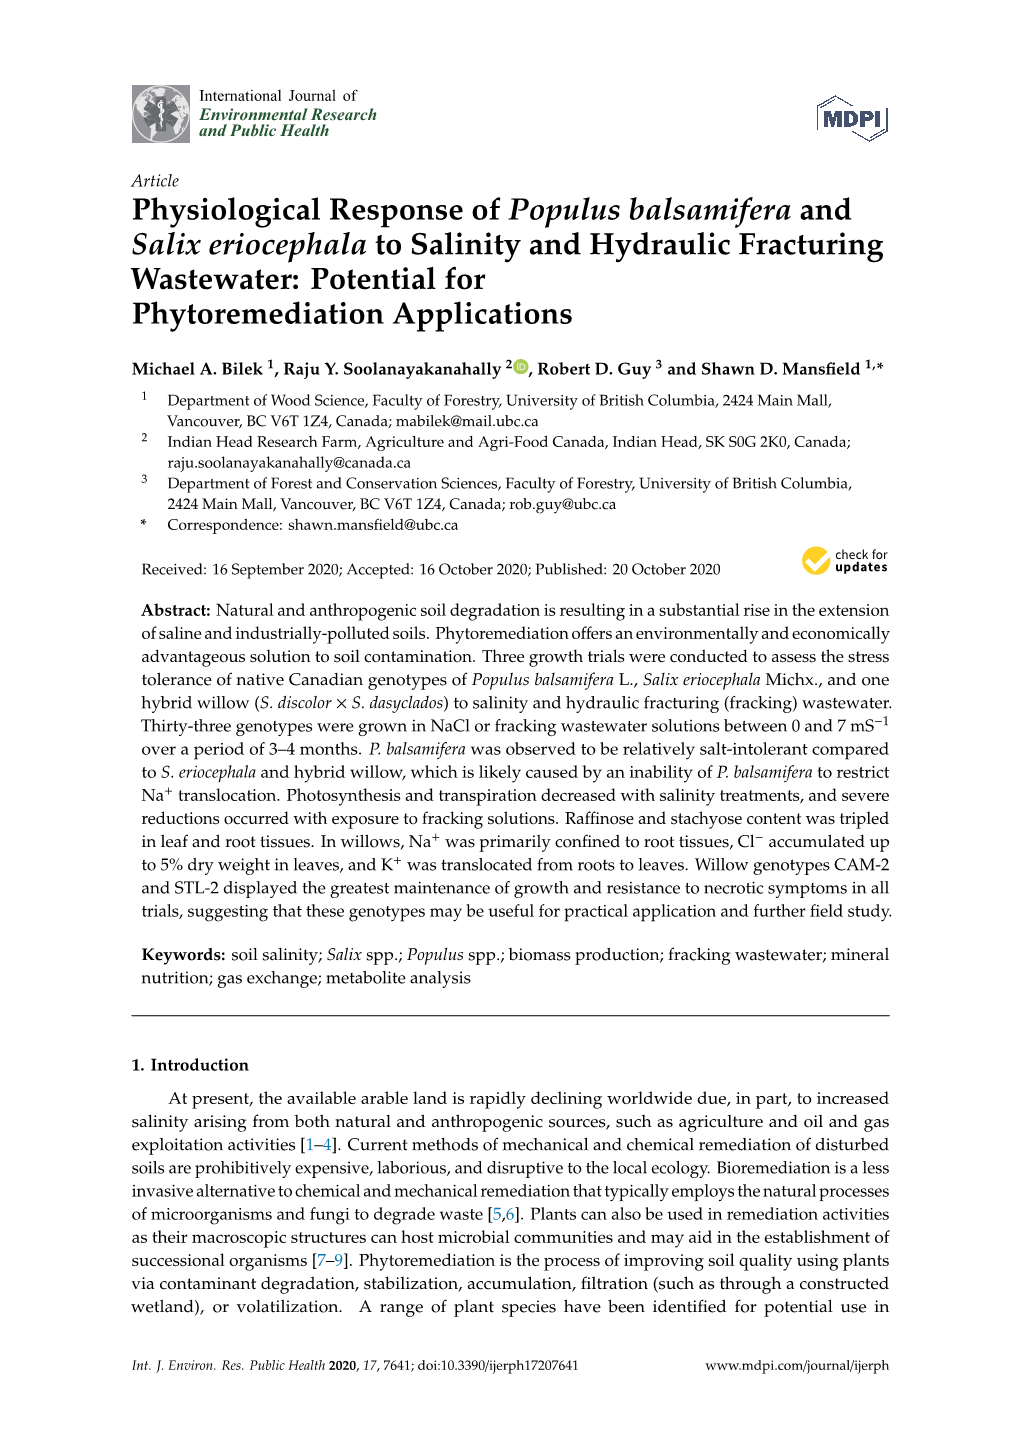 Physiological Response of Populus Balsamifera and Salix Eriocephala to Salinity and Hydraulic Fracturing Wastewater: Potential for Phytoremediation Applications